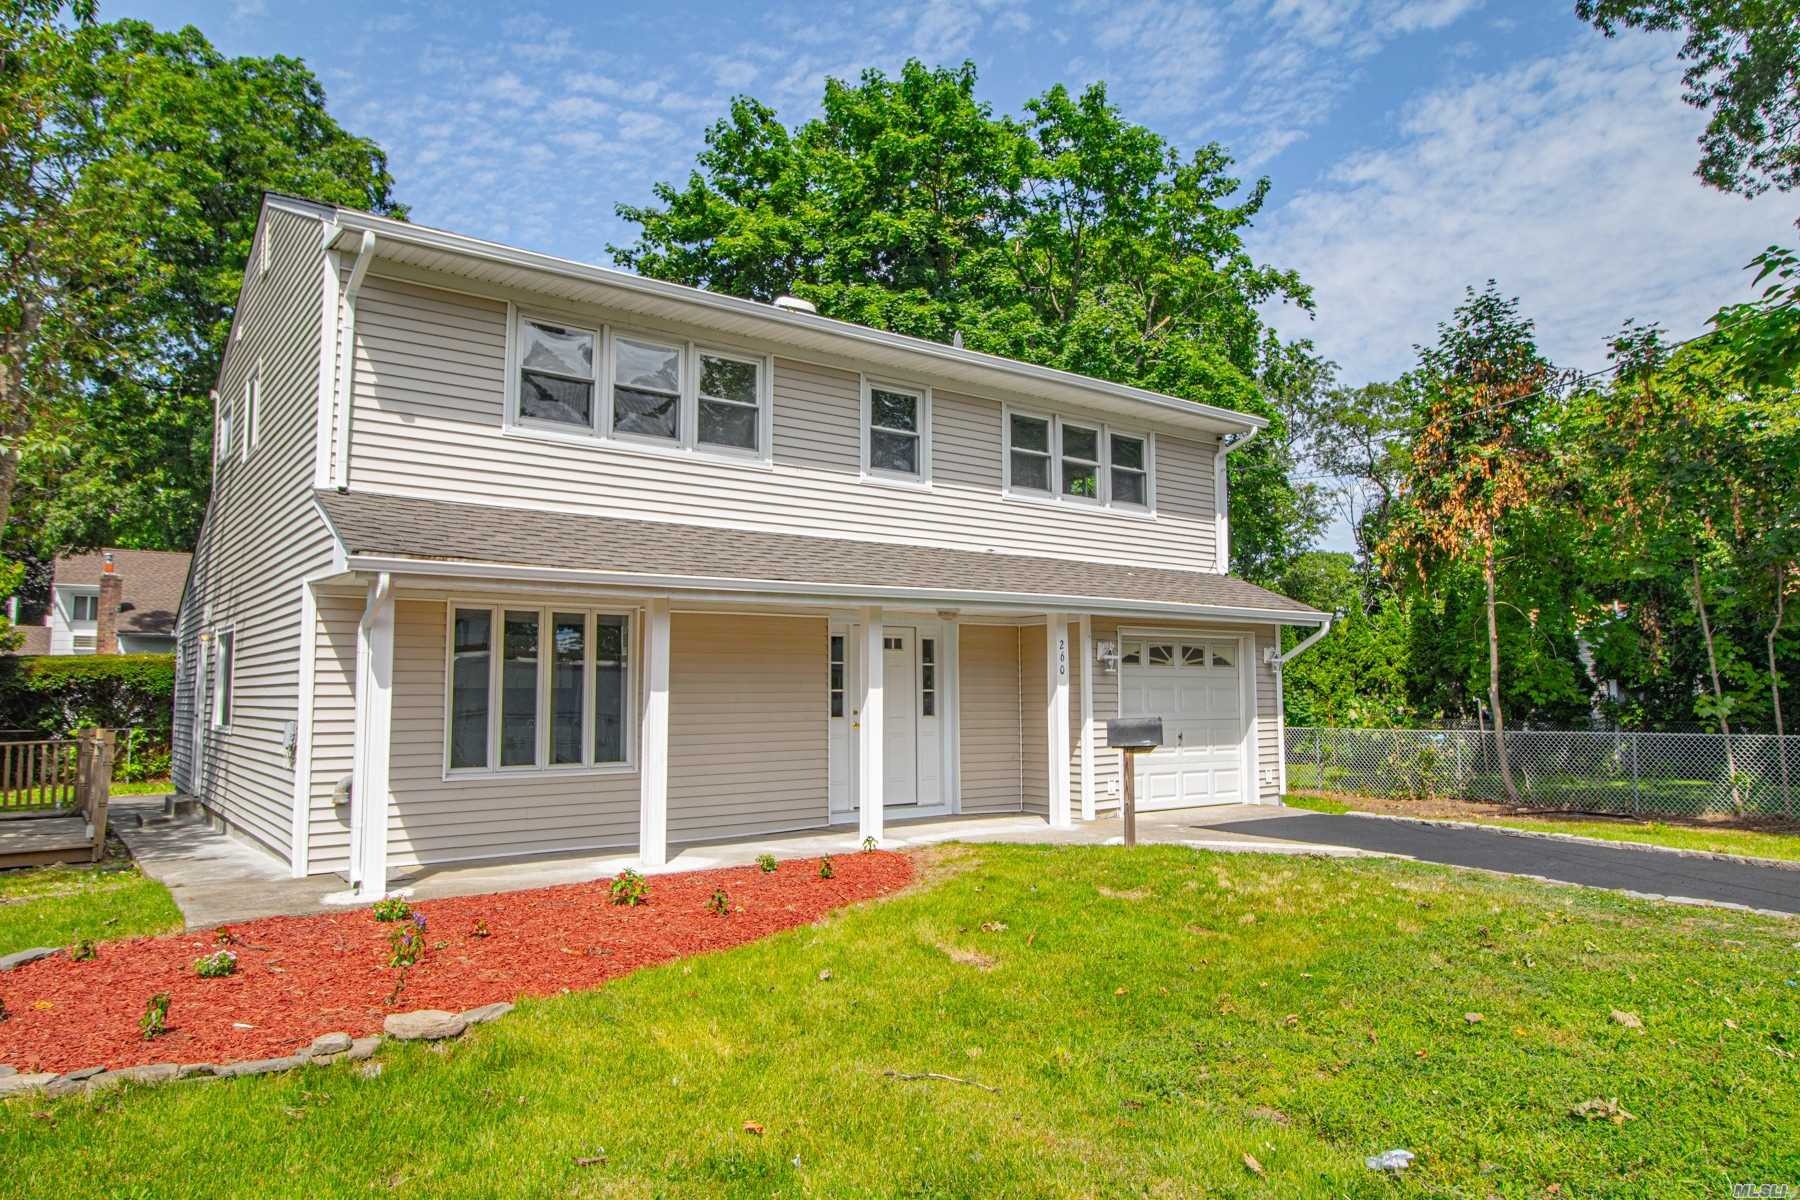 NEW NEW NEW! What A Find! Huge Colonial with TWO Living Rooms, New Kitchen, New Bathrooms, New CAC, New Heating System, New Hardwood Floors, New Sealed Driveway, Too Much Too List! Must Come! Will Go Fast!!